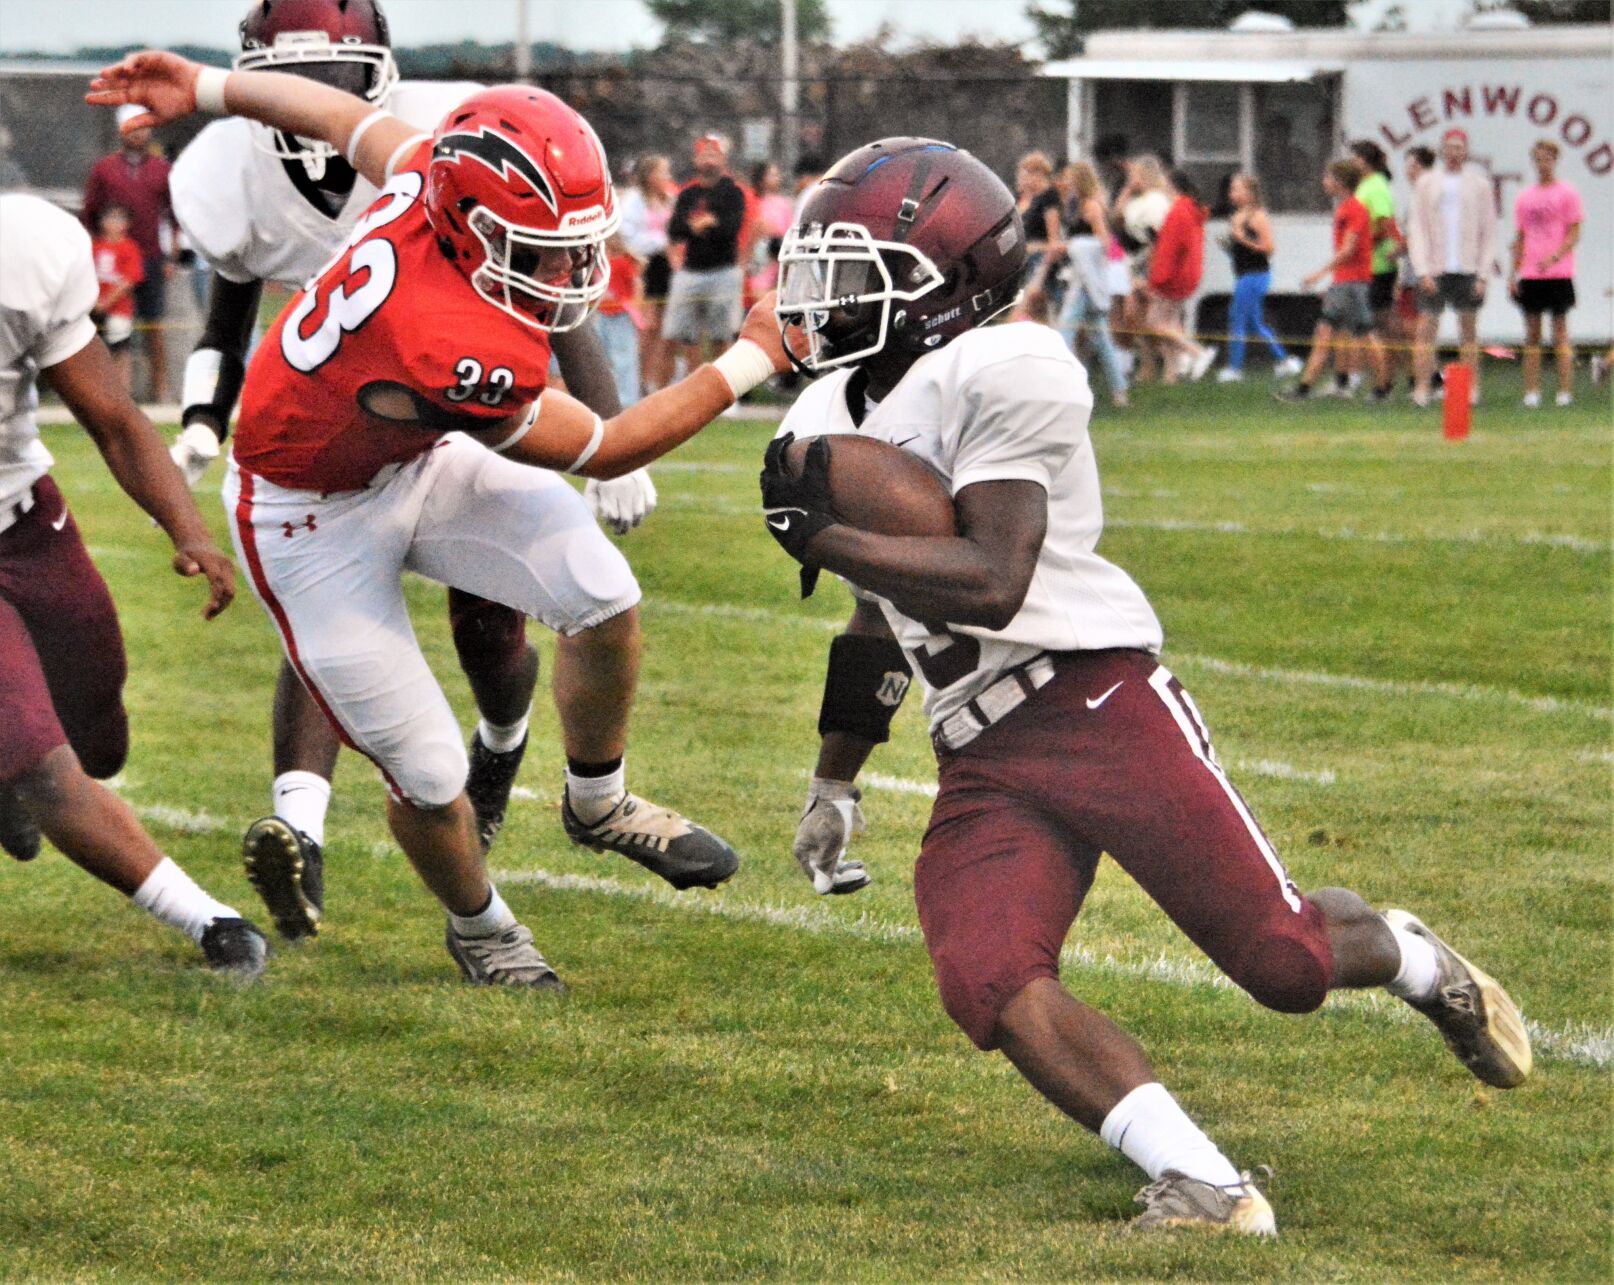 Danville Meets Peoria High in Conference Opener: Battle of The Losing Teams